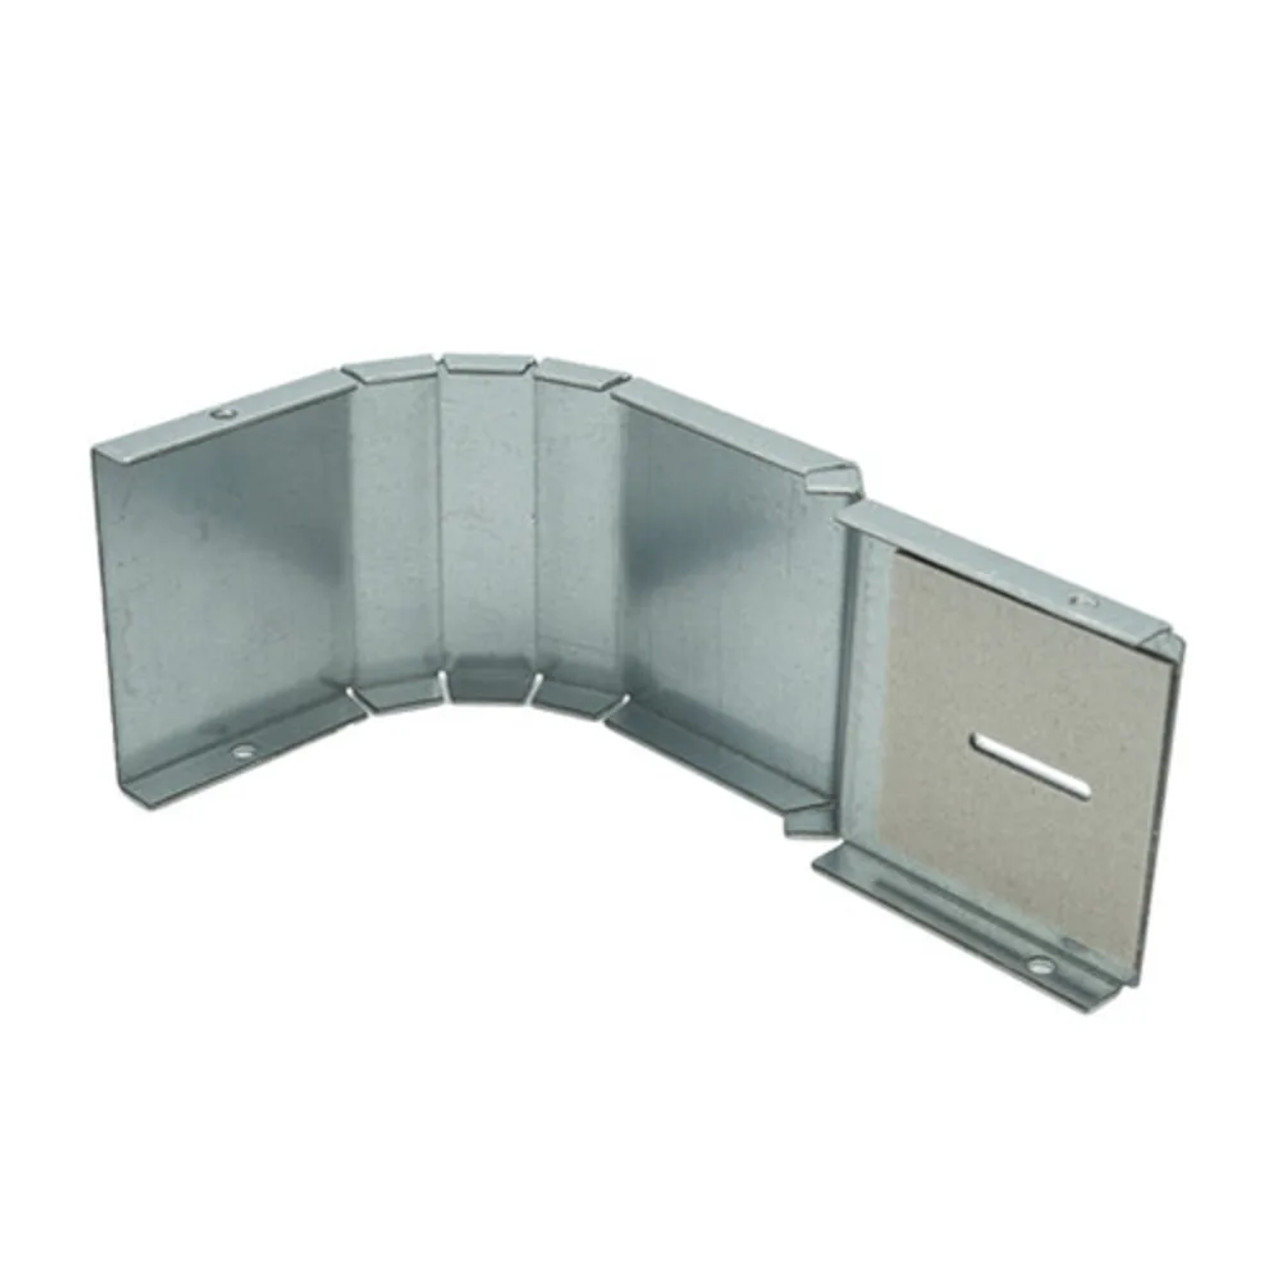 Pinnacle Dryer Fan Cover - Protective Cover for Enhanced Airflow